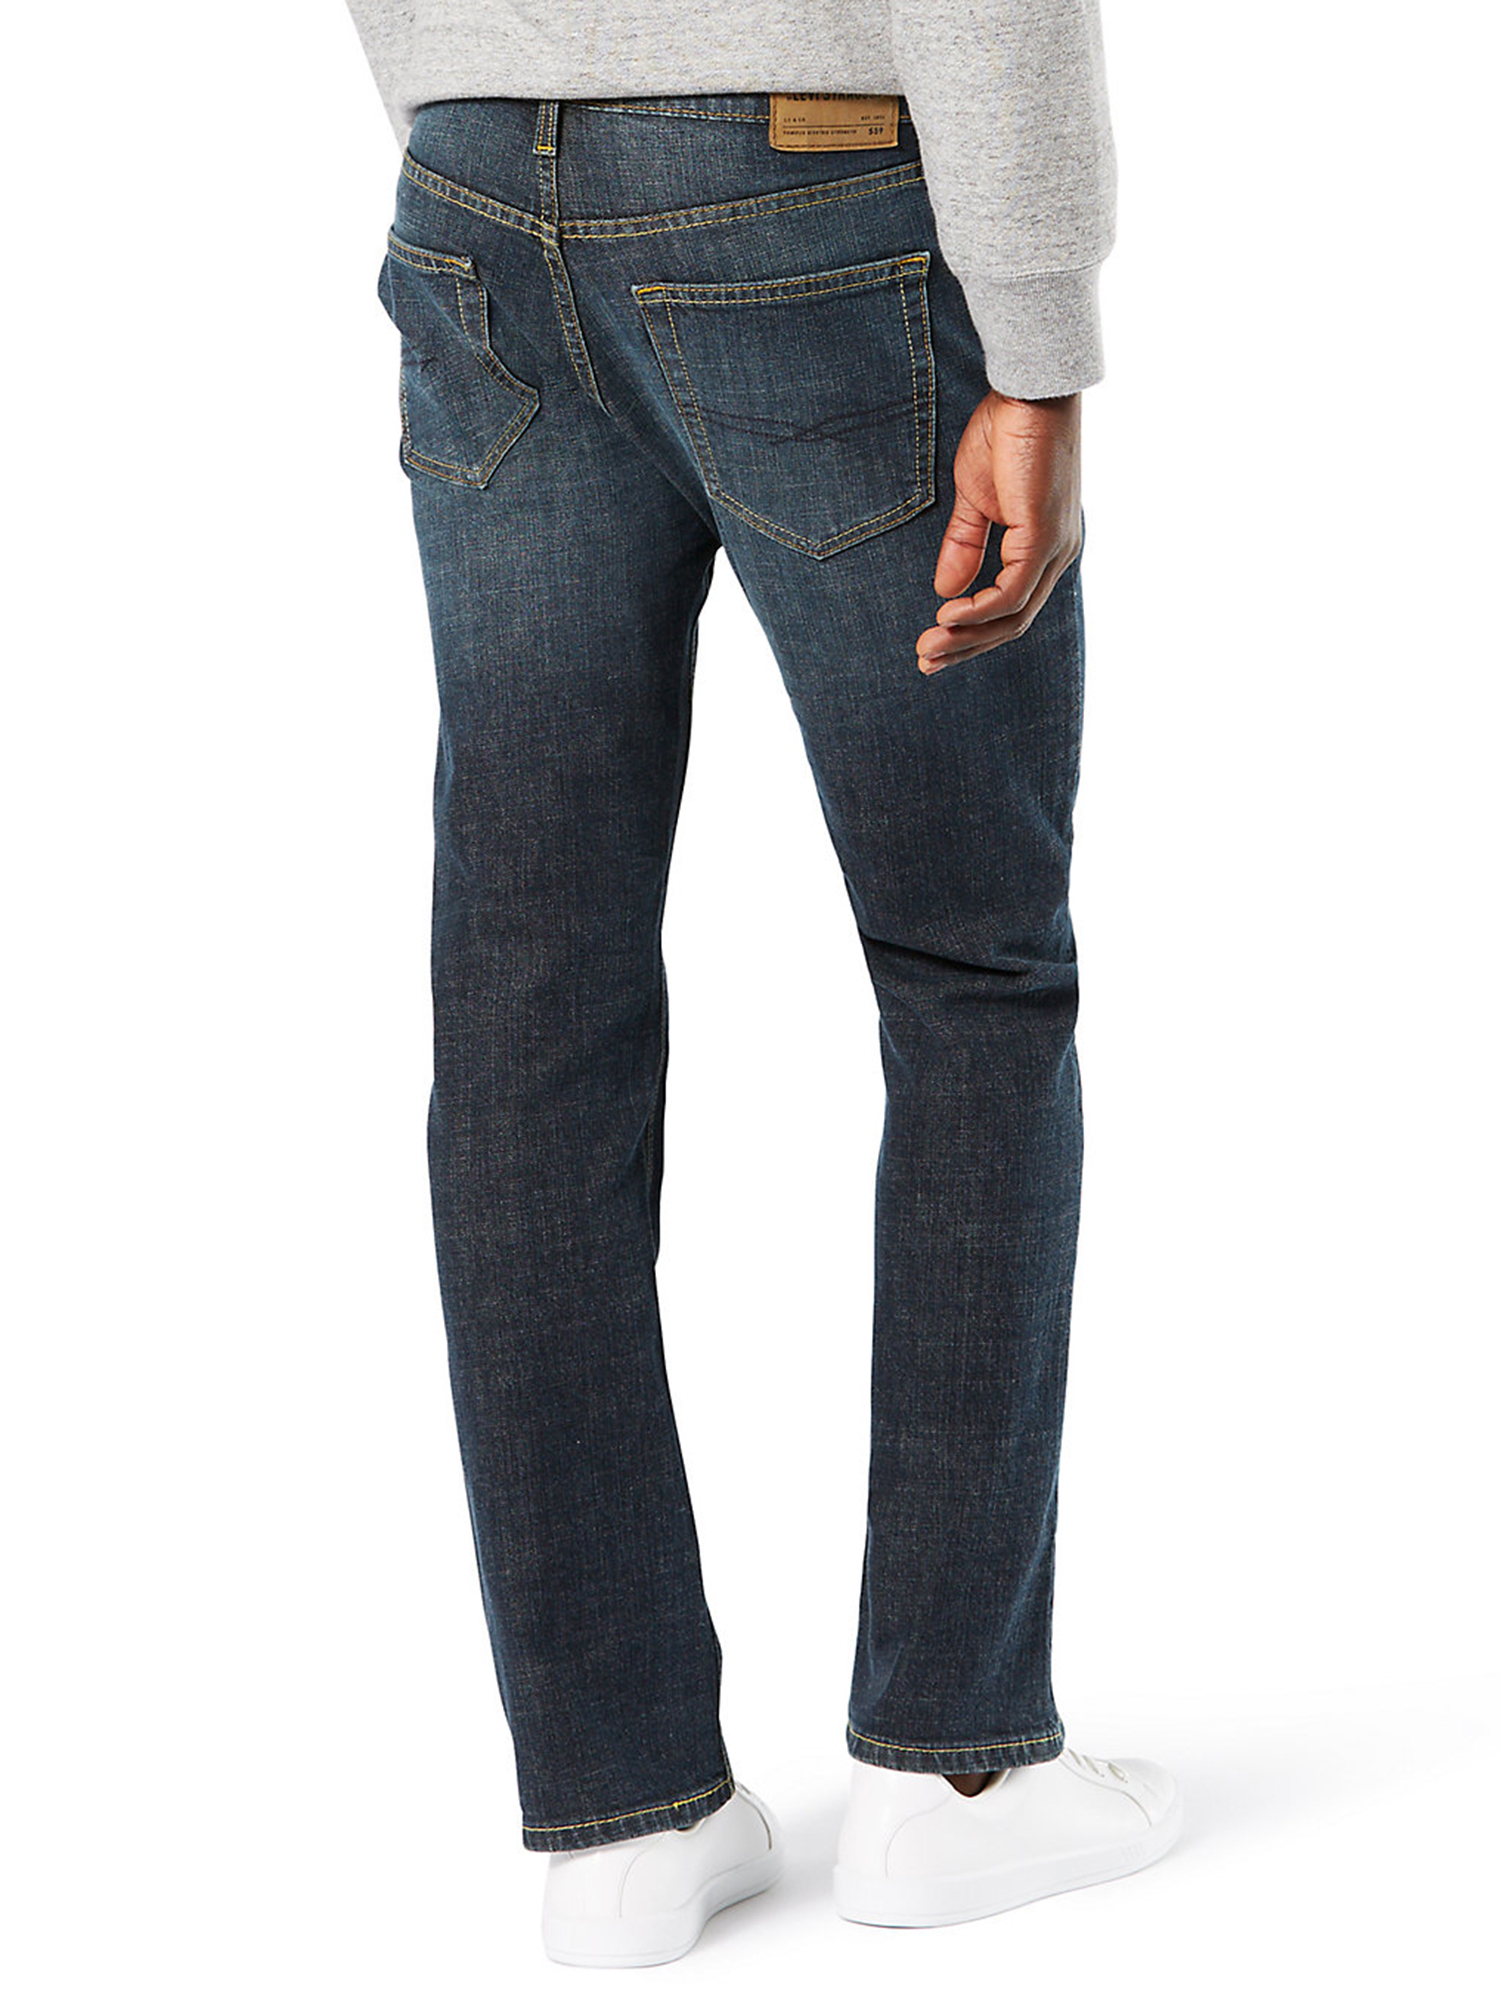 Signature by Levi Strauss & Co. Men's and Big and Tall Bootcut Jeans - image 4 of 10